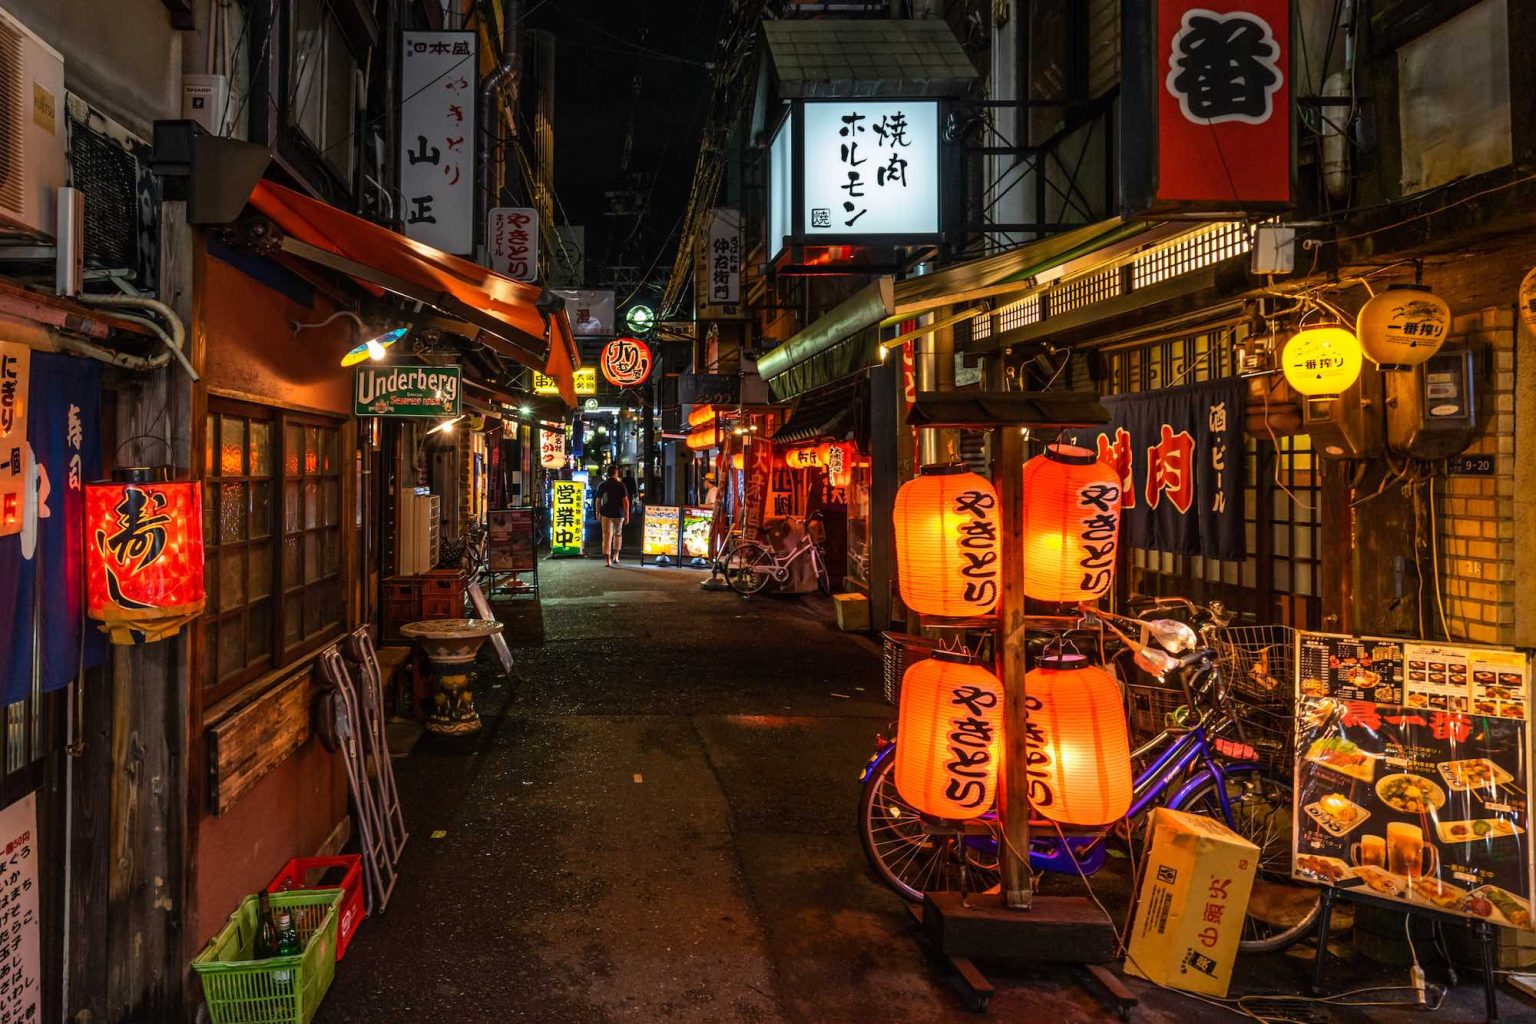 Osaka, Japan, August 2019 â€“ Night view of a quiet street in Osaka near Dotonbori area full of traditional japanese restaurants and colorful lanterns